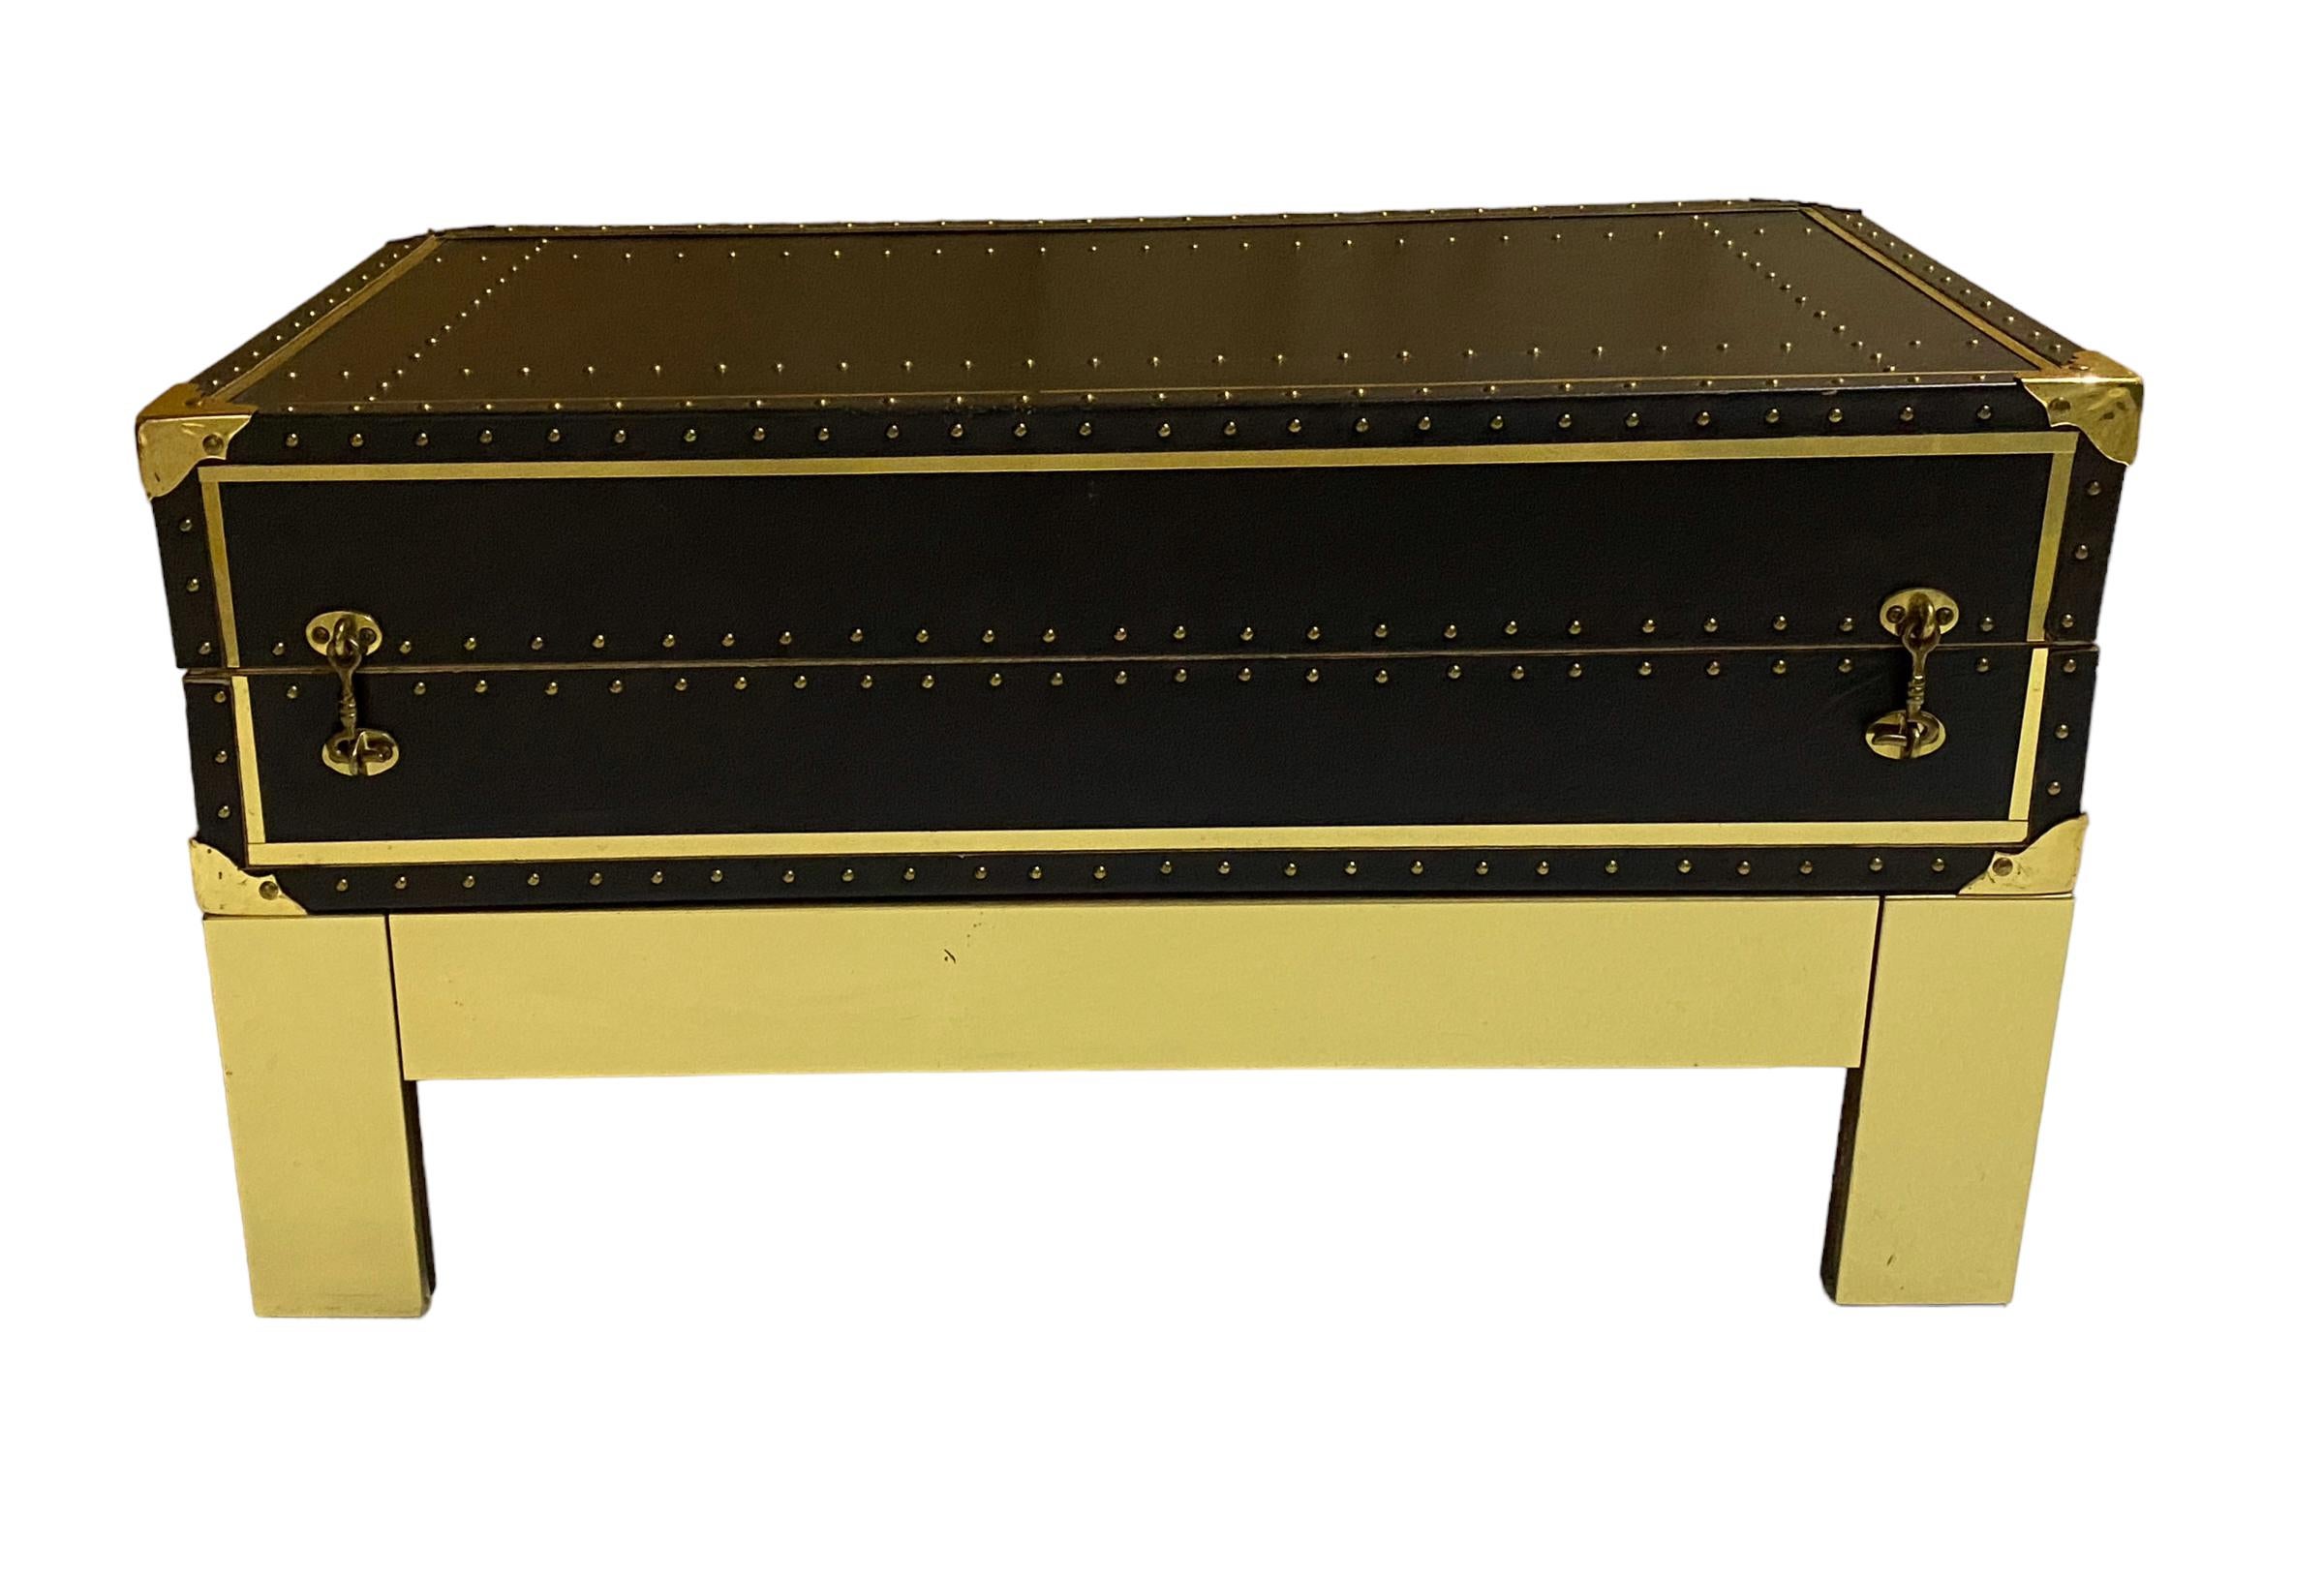 Sheik Campaign Style 1970s Brass Studded Leather Trunk on Brass Stand 
USA, circa 1970s

Immerse your living space with this  1970s exquisite Sheik Campaign Style Brass Studded Leather Trunk on  Stand. Made in the USA, this visually stunning piece